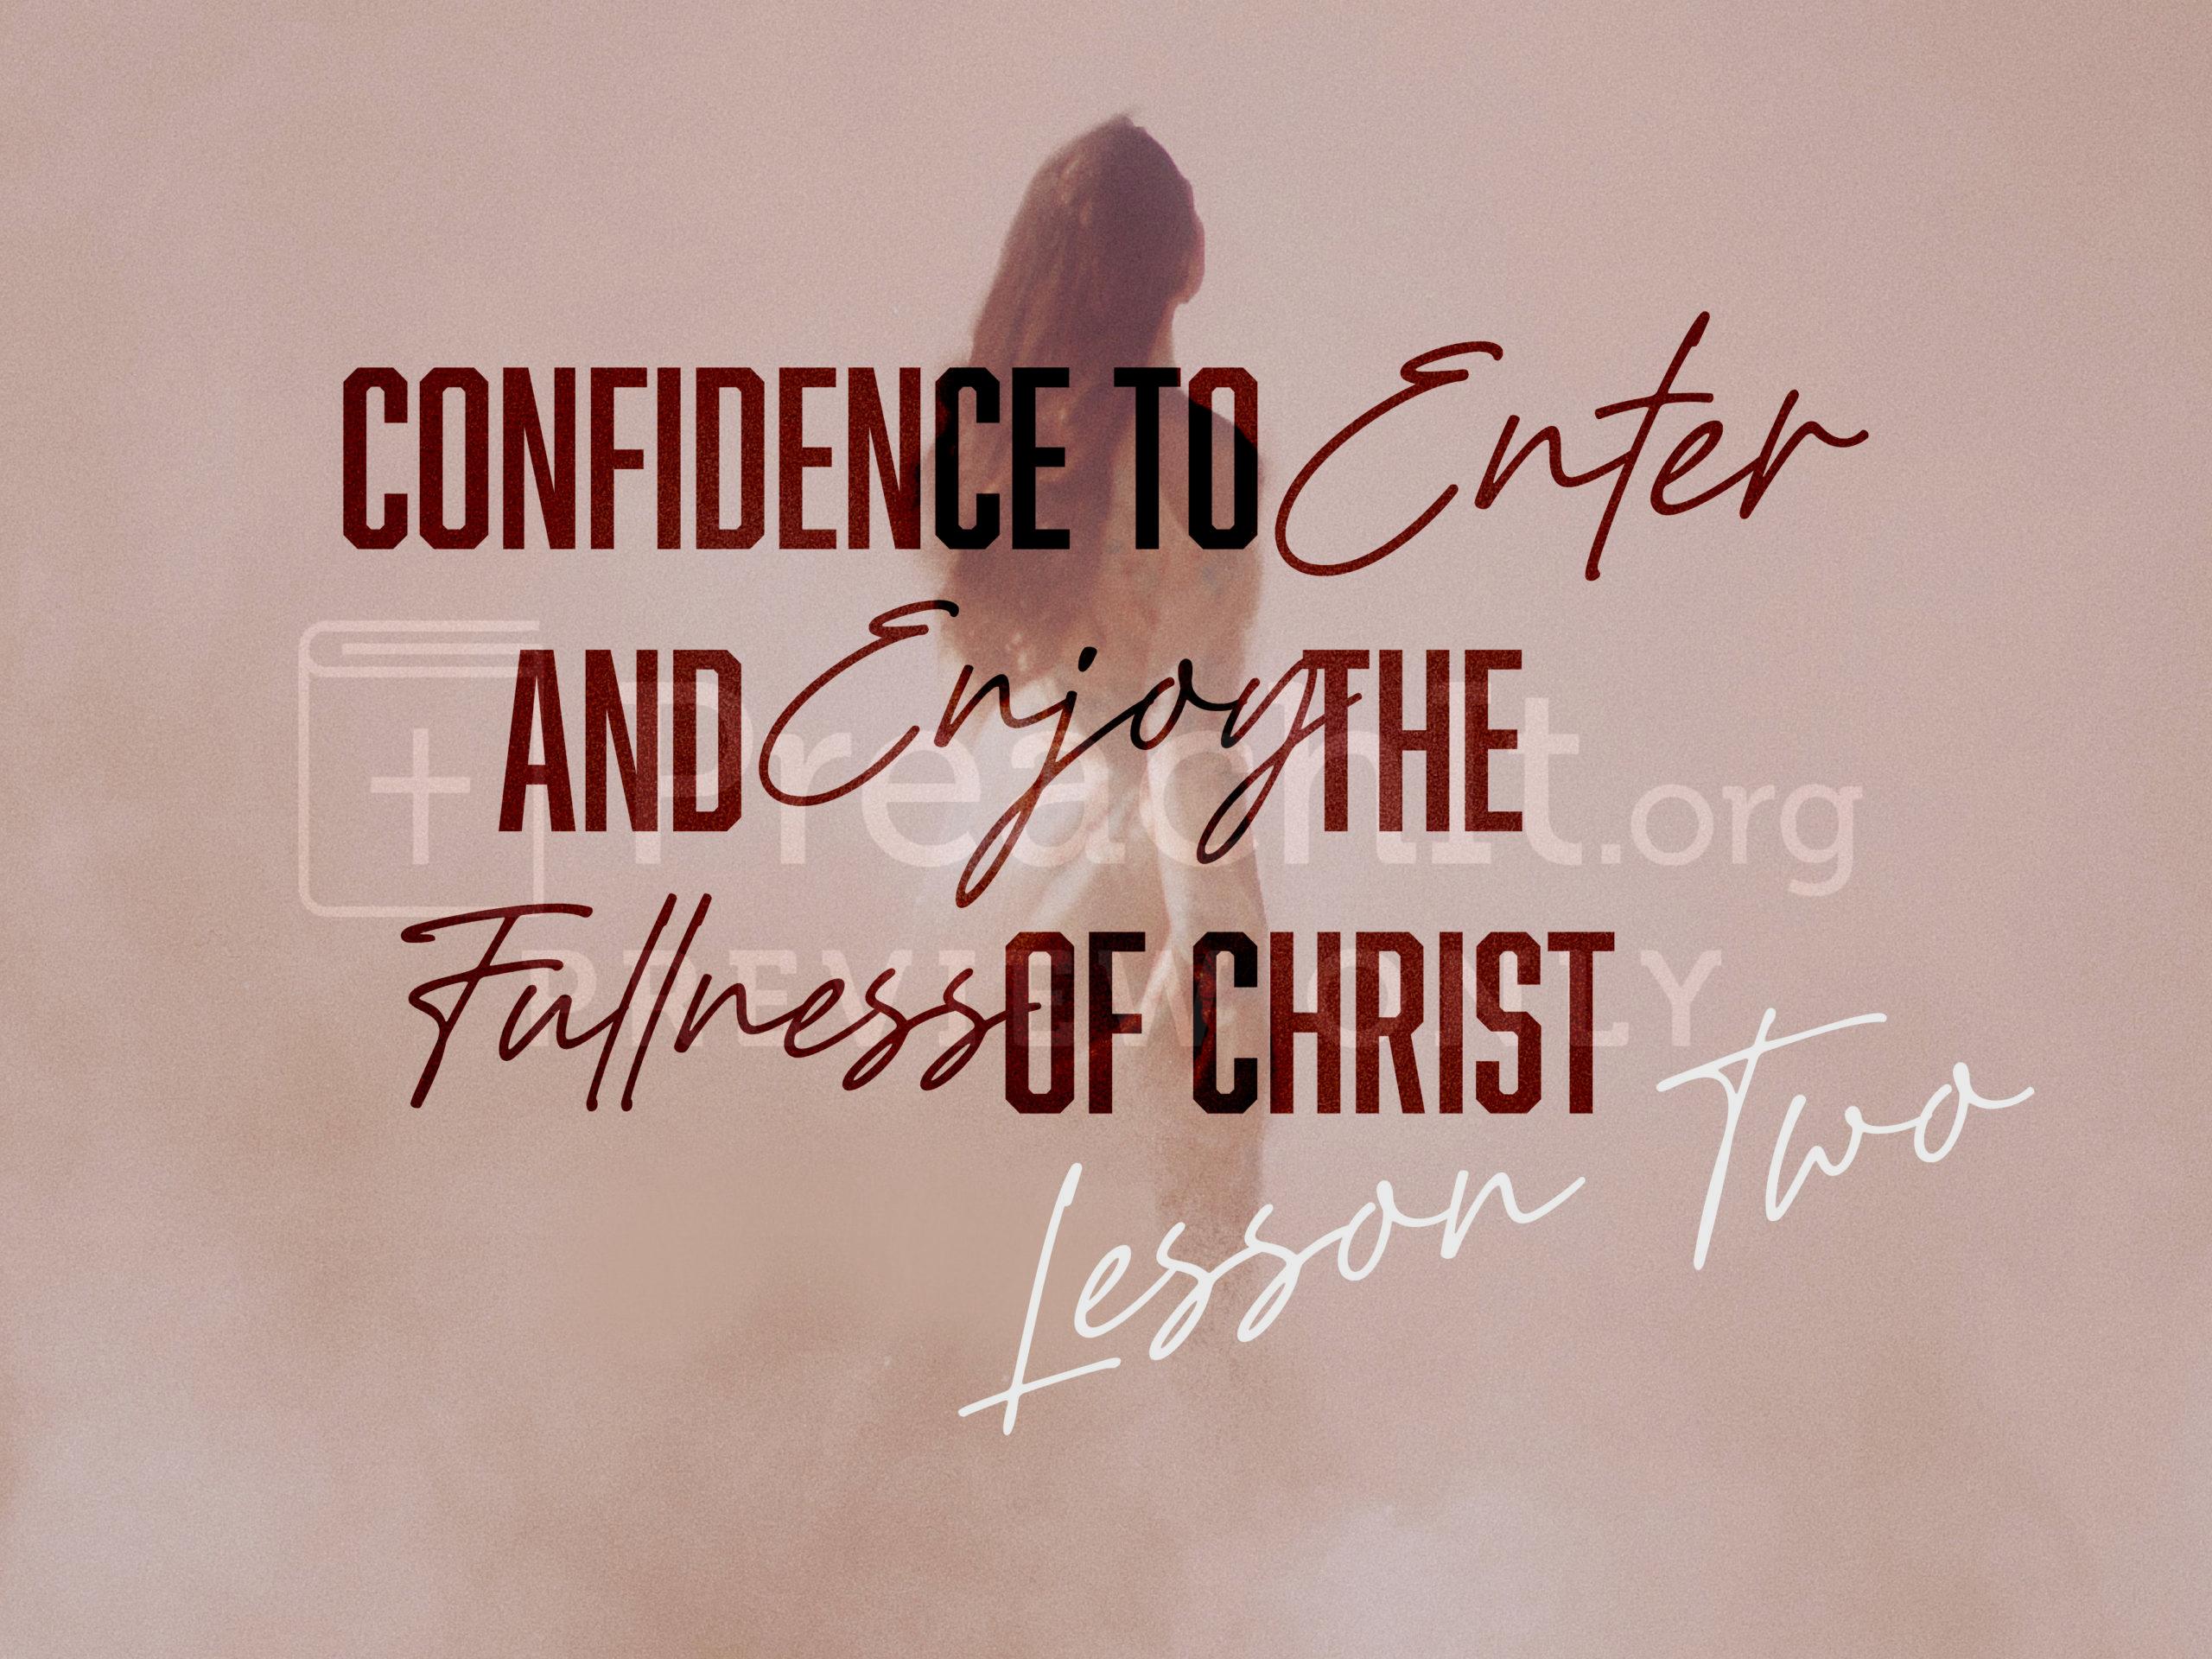 Lesson 2: Confidence to Enter and Enjoy the Fullness of Christ